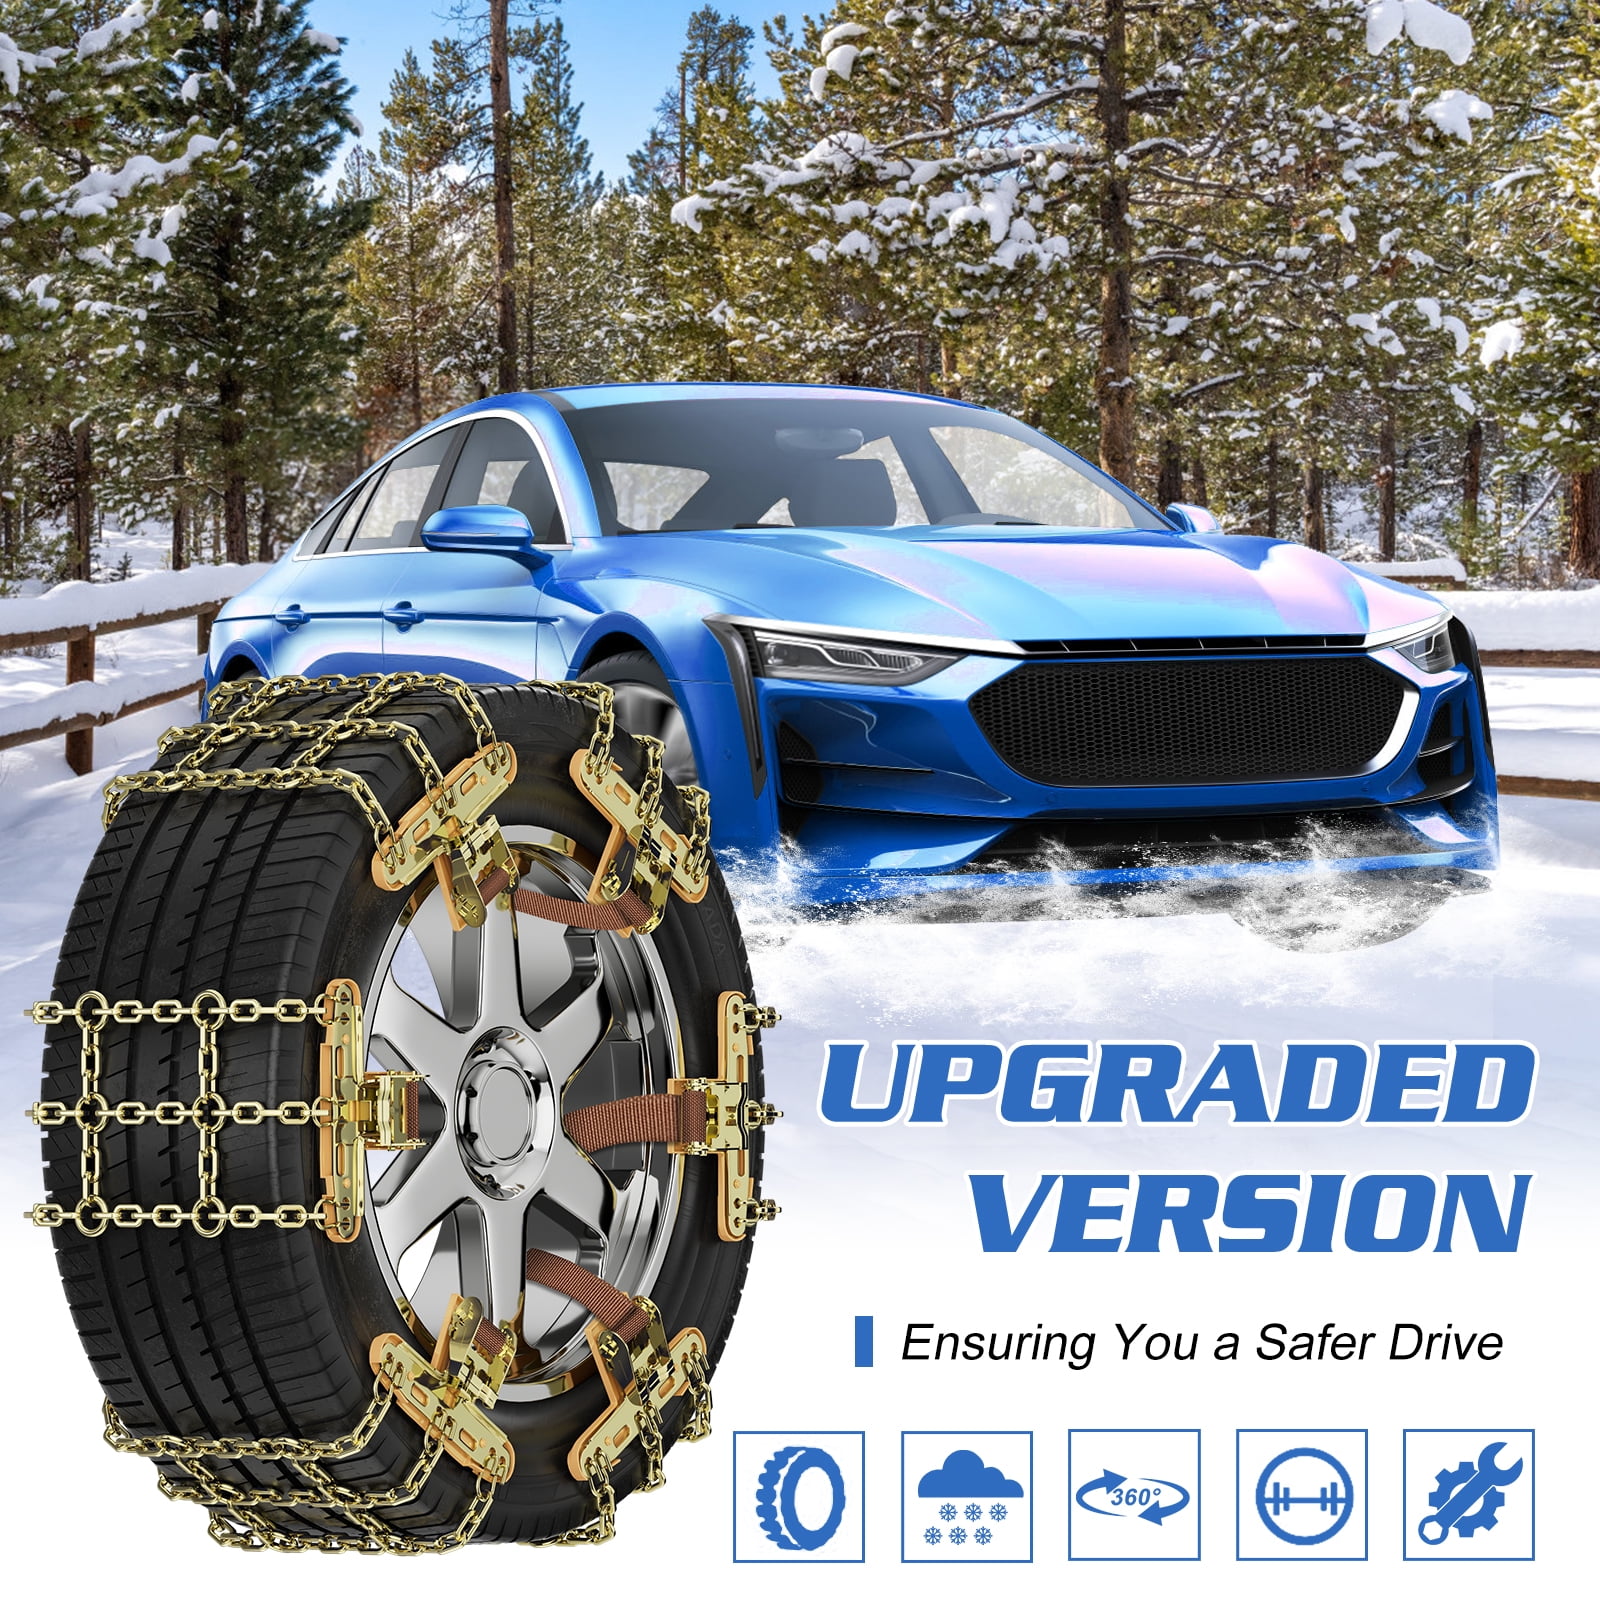 ABORON 12 Pcs Tire Snow Chains, Anti-Skid Chains for SUV,Truck,RV of Tire  Width 220-310 mm (8.6-12.2 inch),Heavy Duty,Thickened,Adjustable 